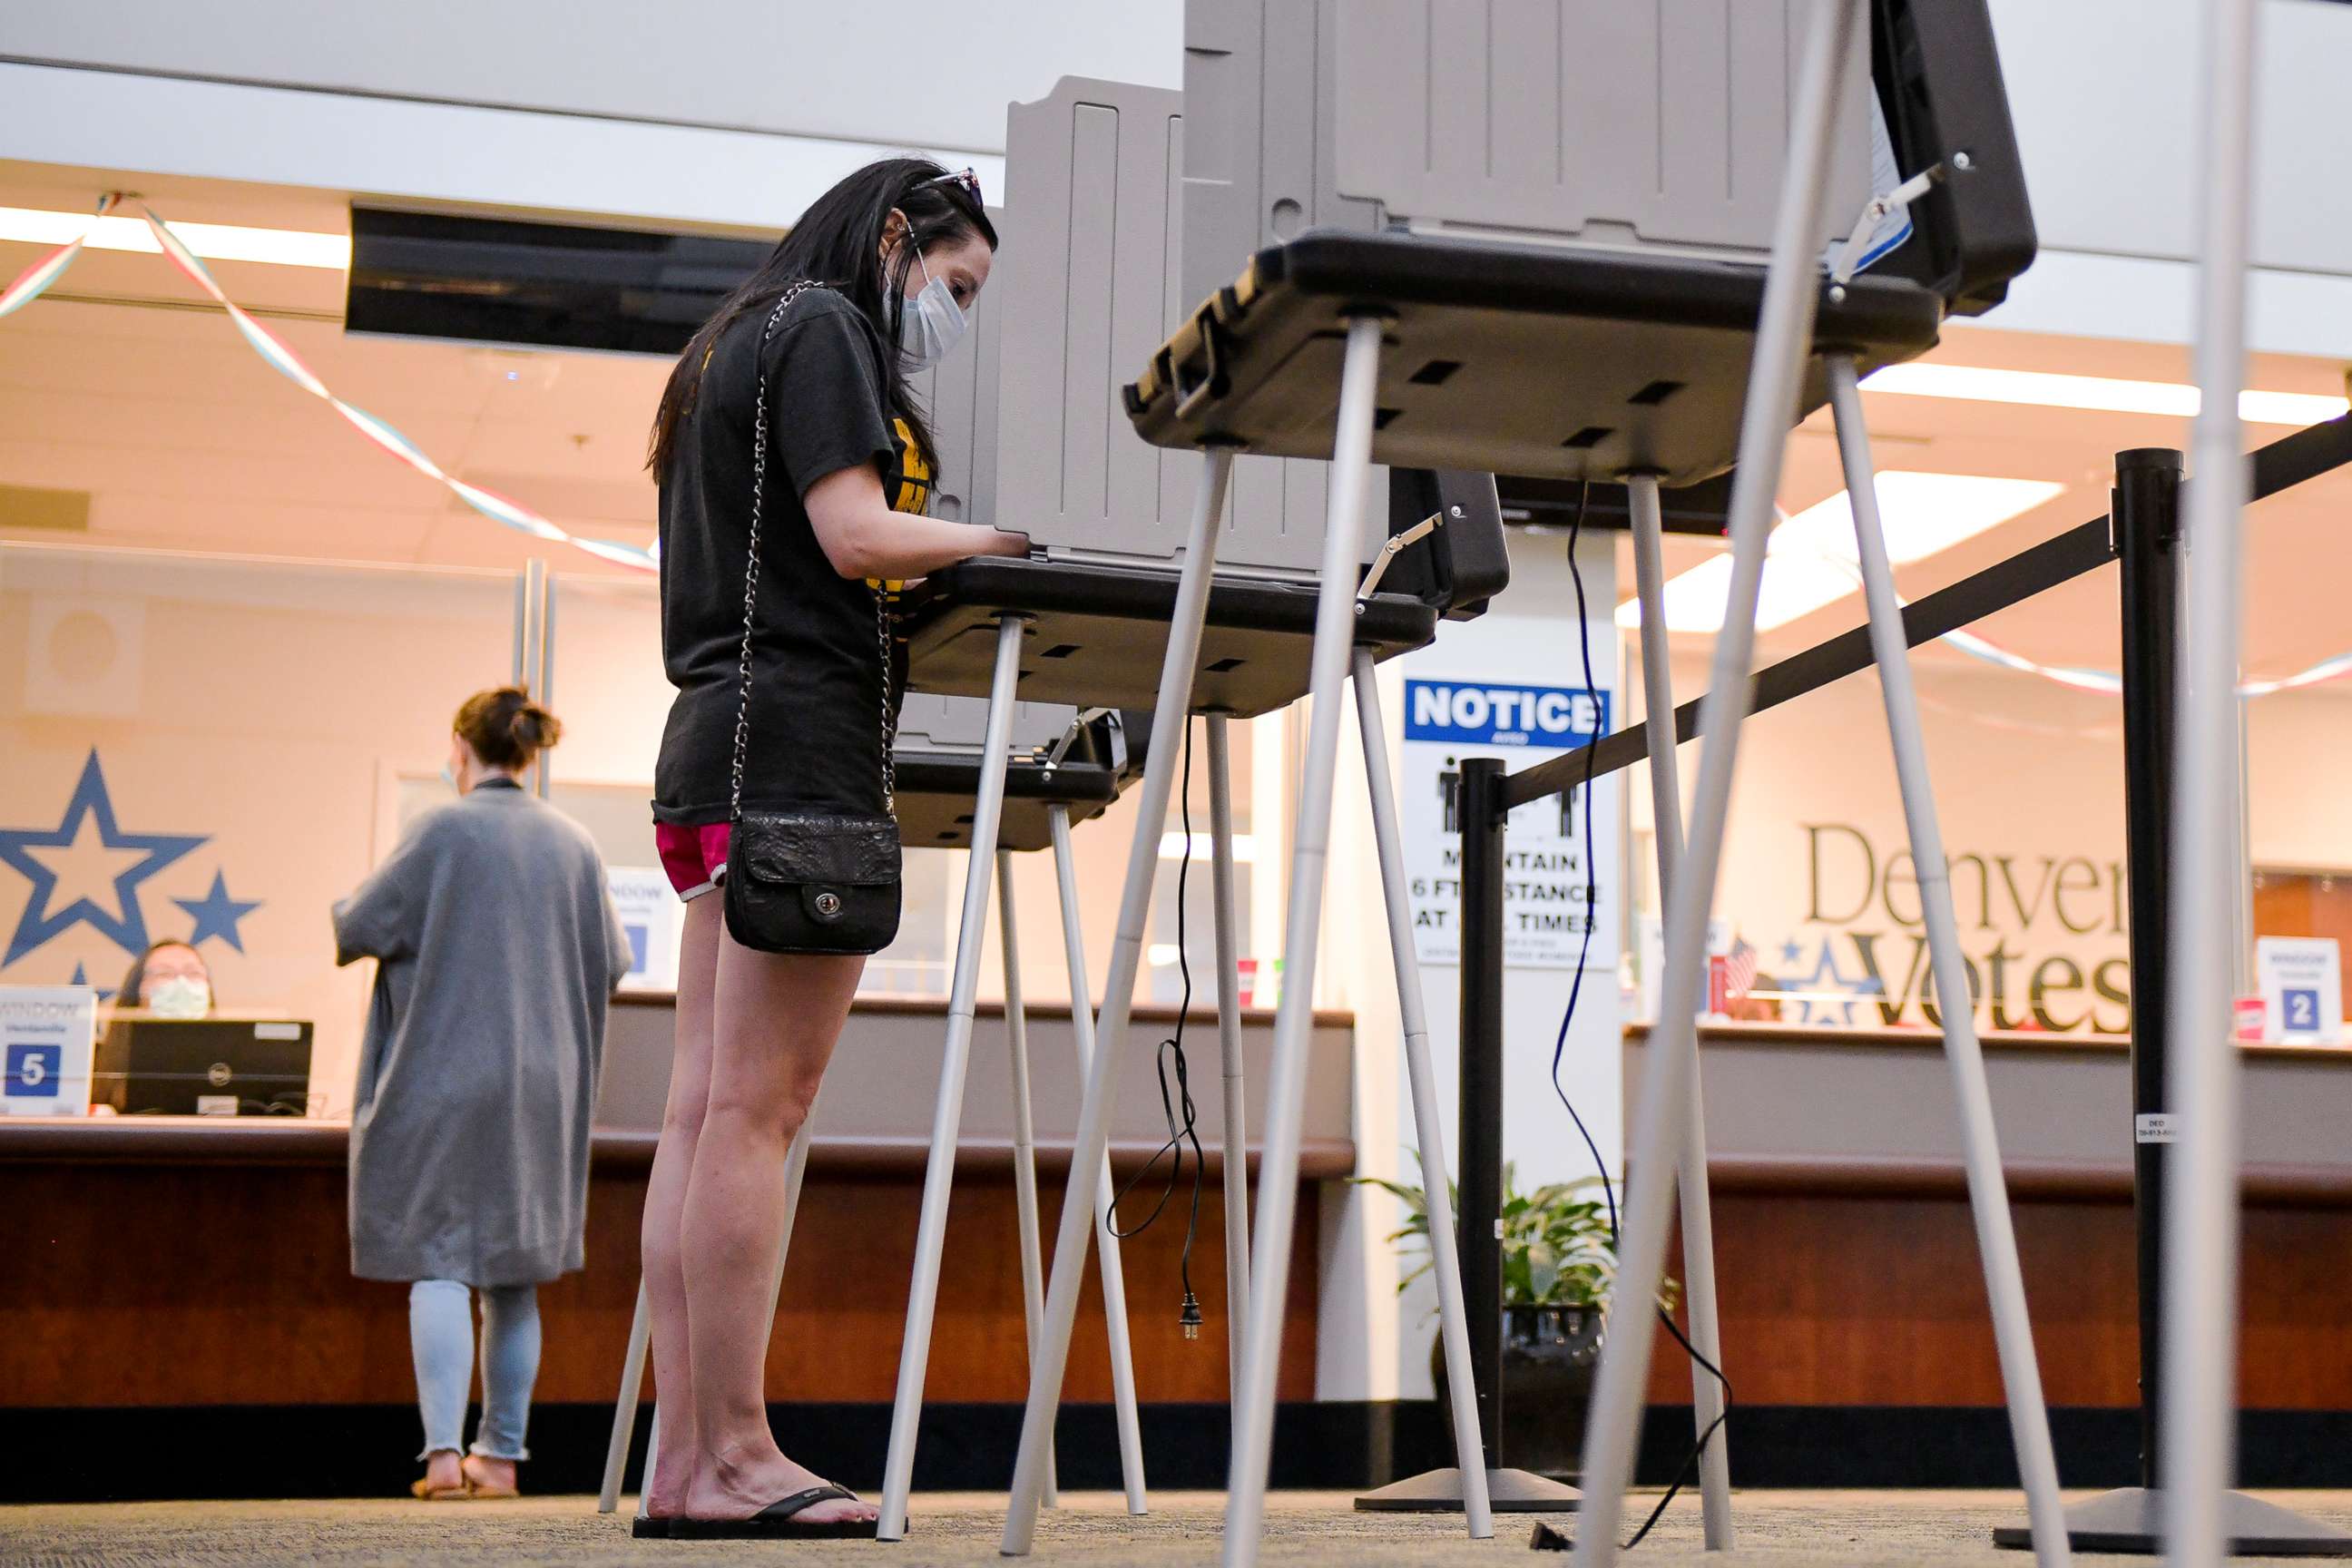 PHOTO: Jennifer Gance votes in the primary election at a polling center in Denver, Colo., June 30, 2020.